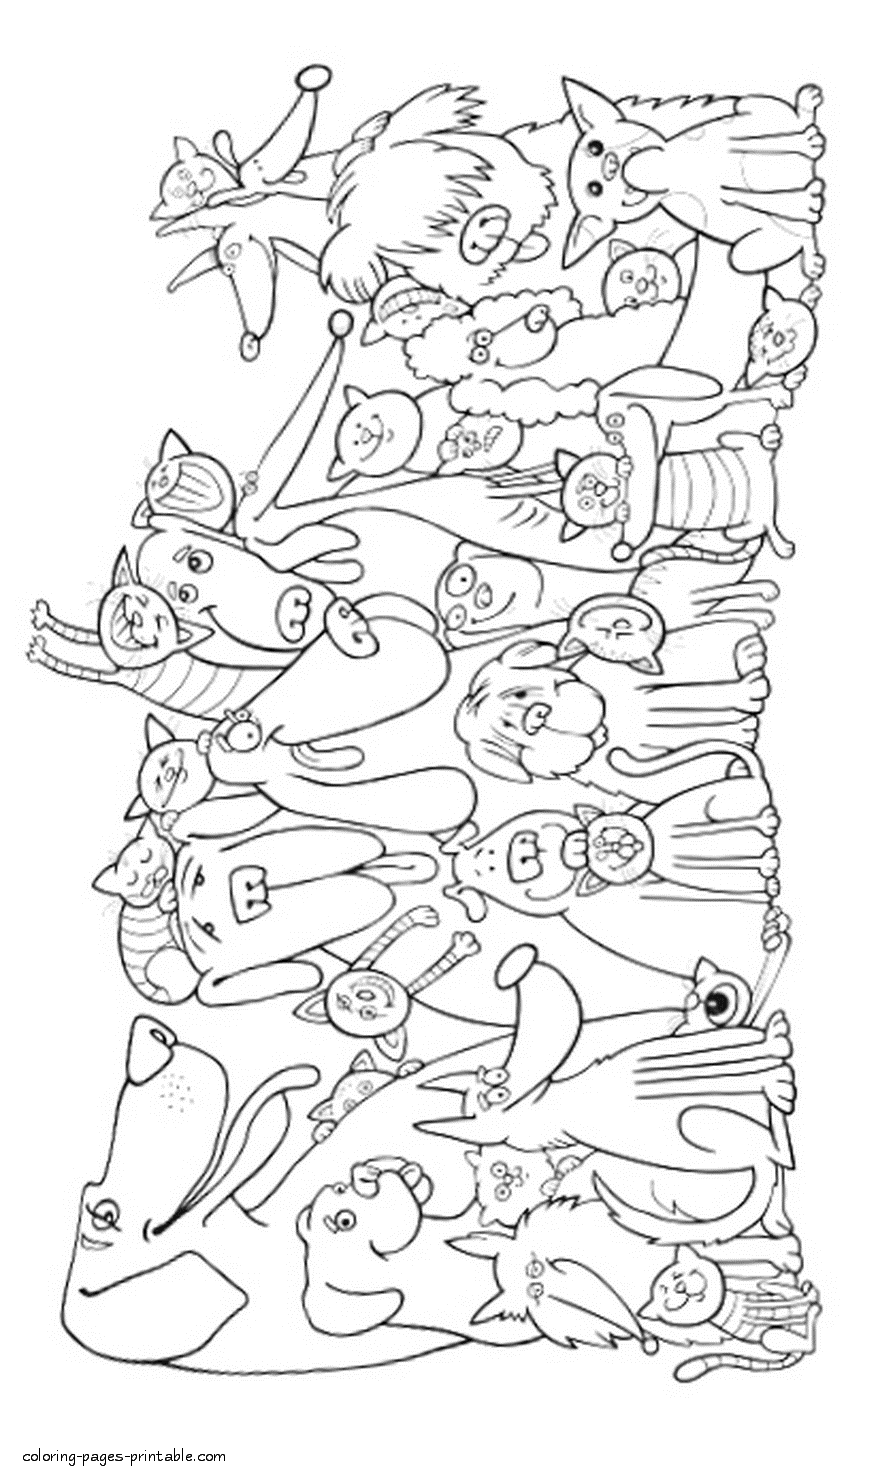 Cats and dogs coloring pages for kids